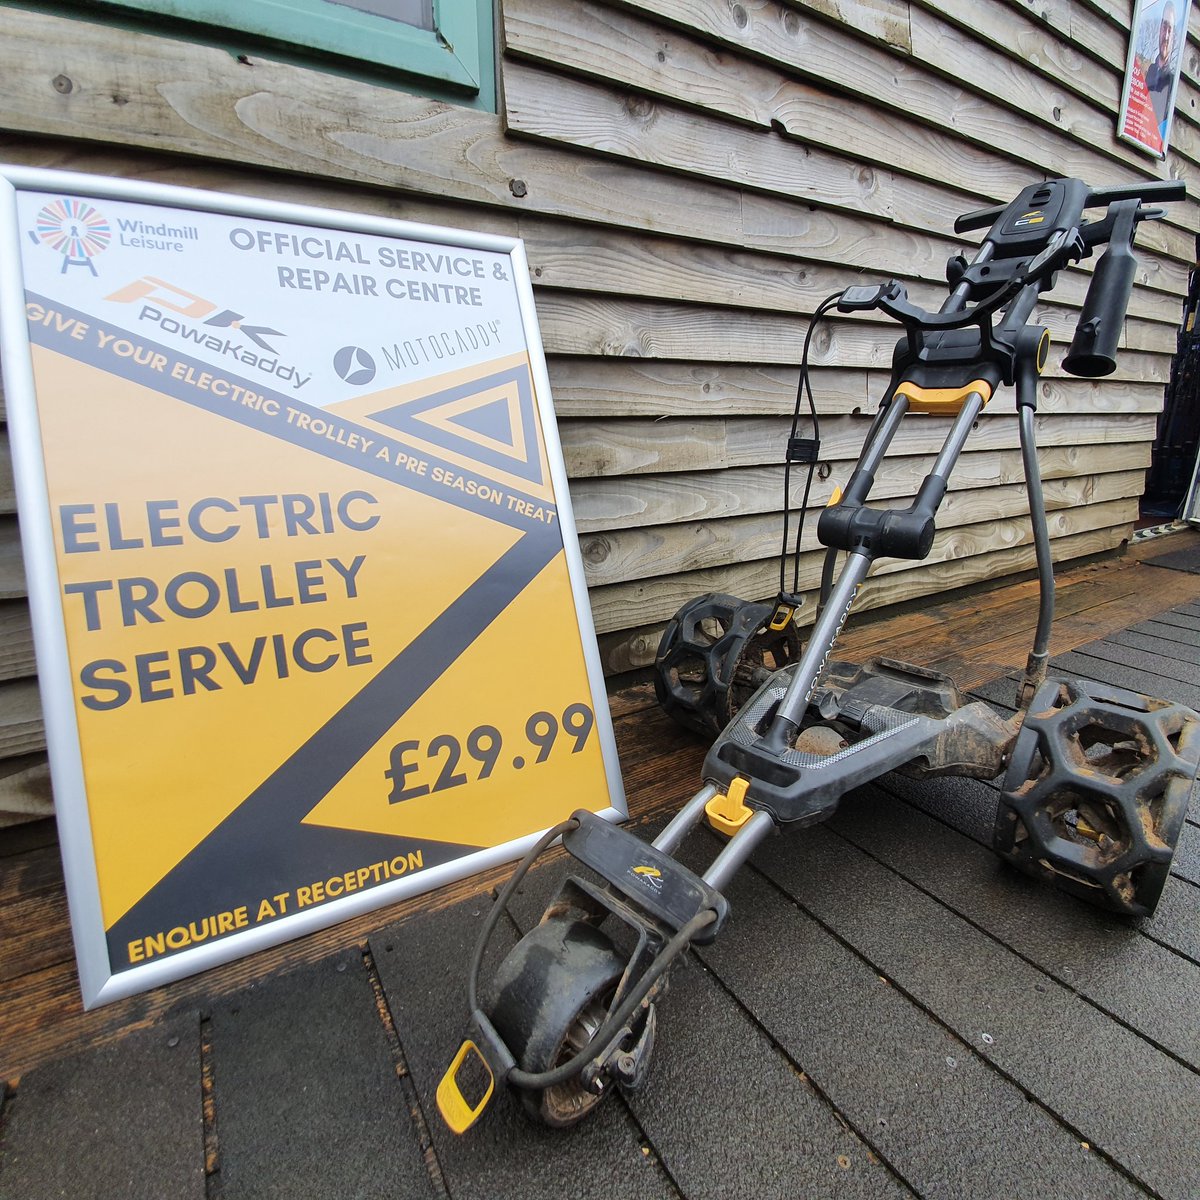 Why not drop your #electrictrolley on before #lockdown & we can get it serviced & ready for when #Golf resumes 

01179709070